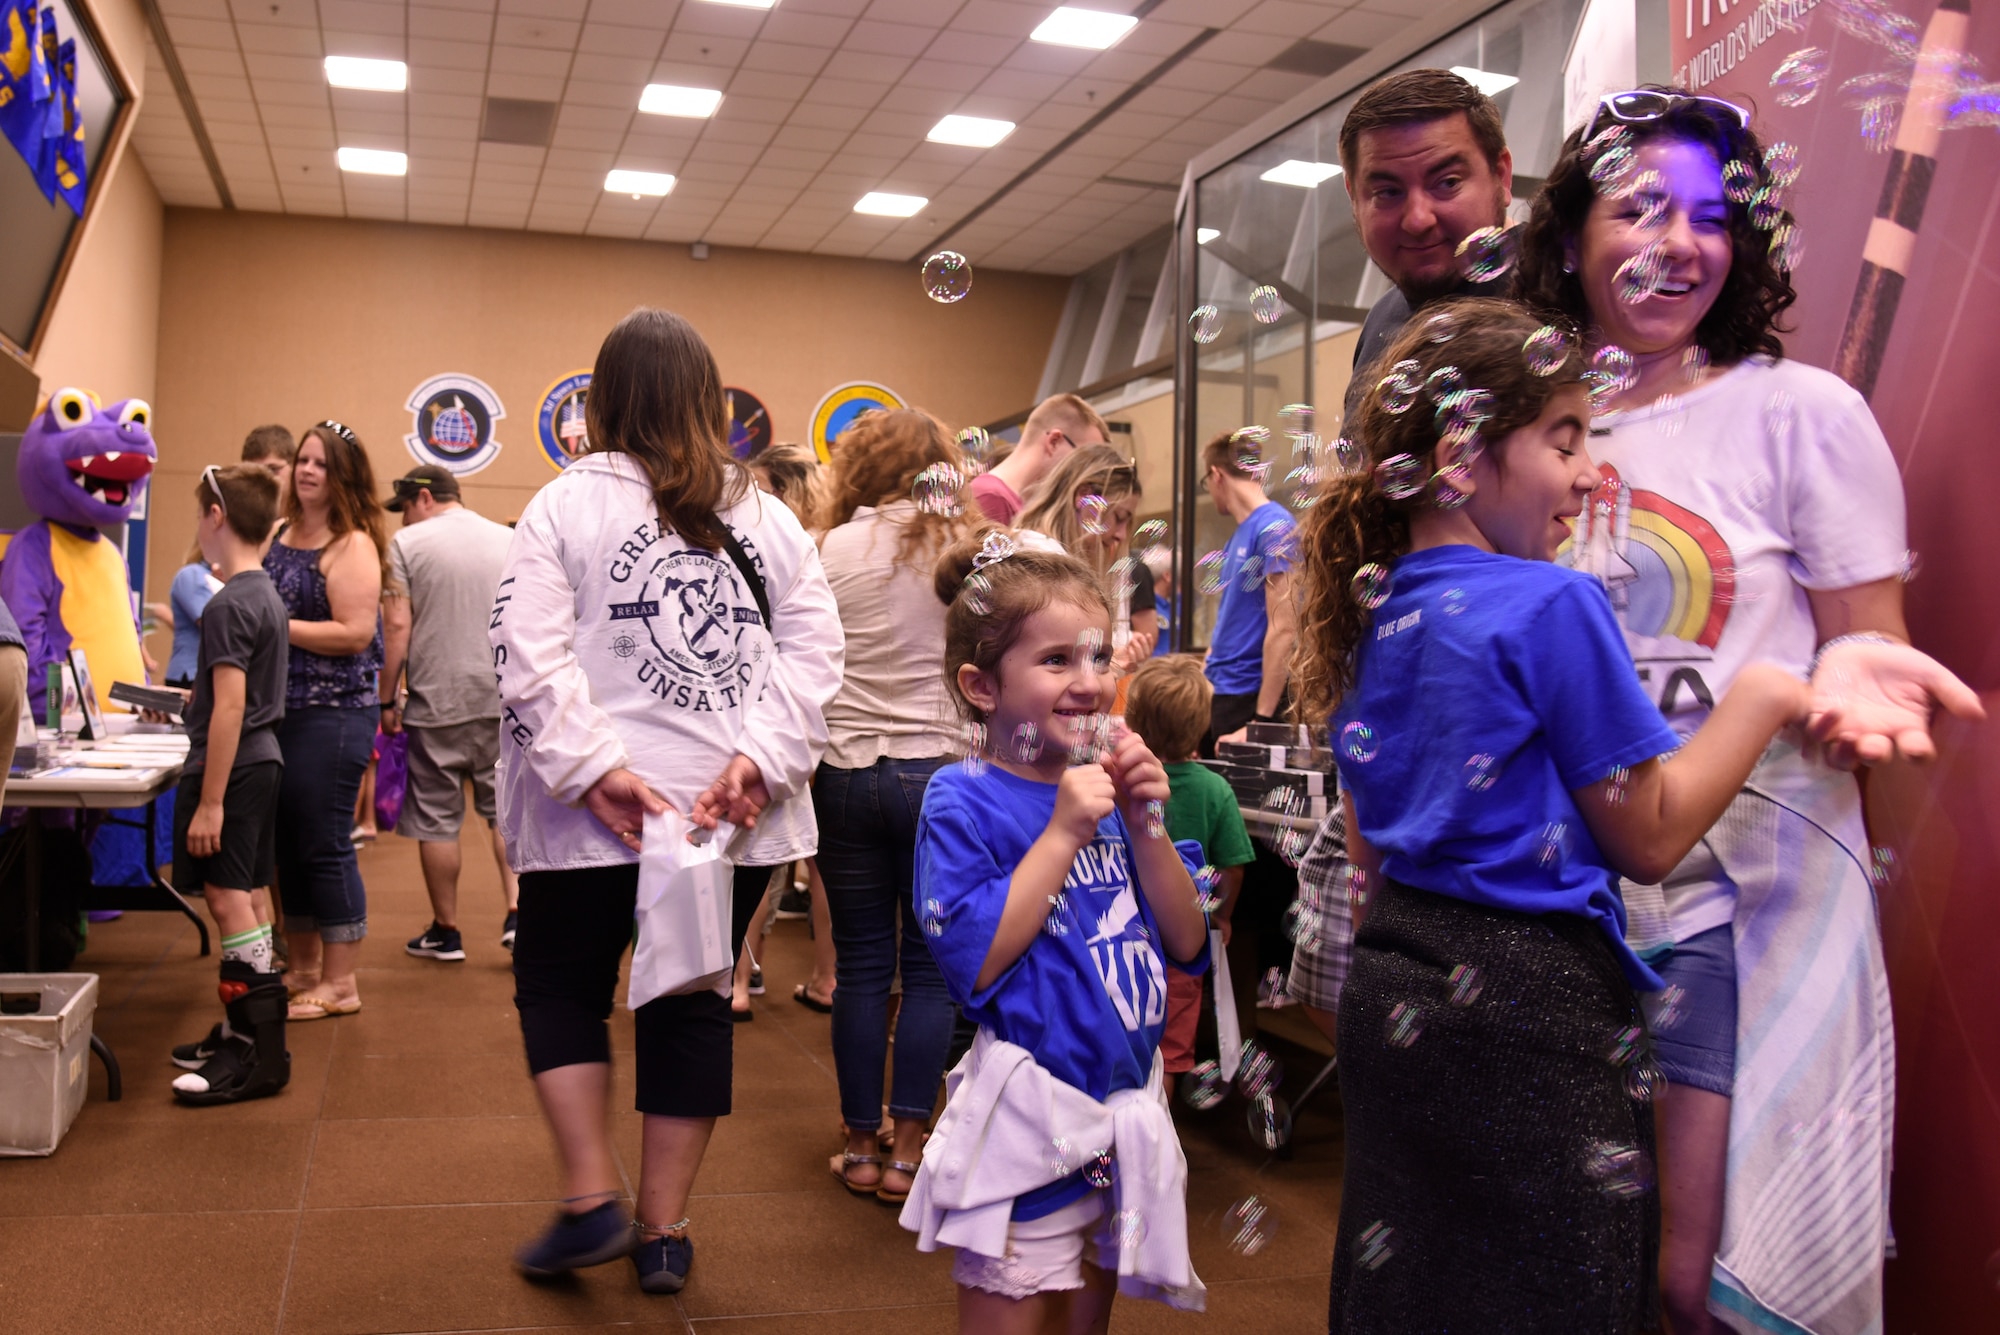 Airmen and their families view several mission partner’s expos at the 5th Space Launch Squadron during the 45th Space Wing Family Day self guided tour of Cape Canaveral Air Force Station, Fla. on April 6, 2019.